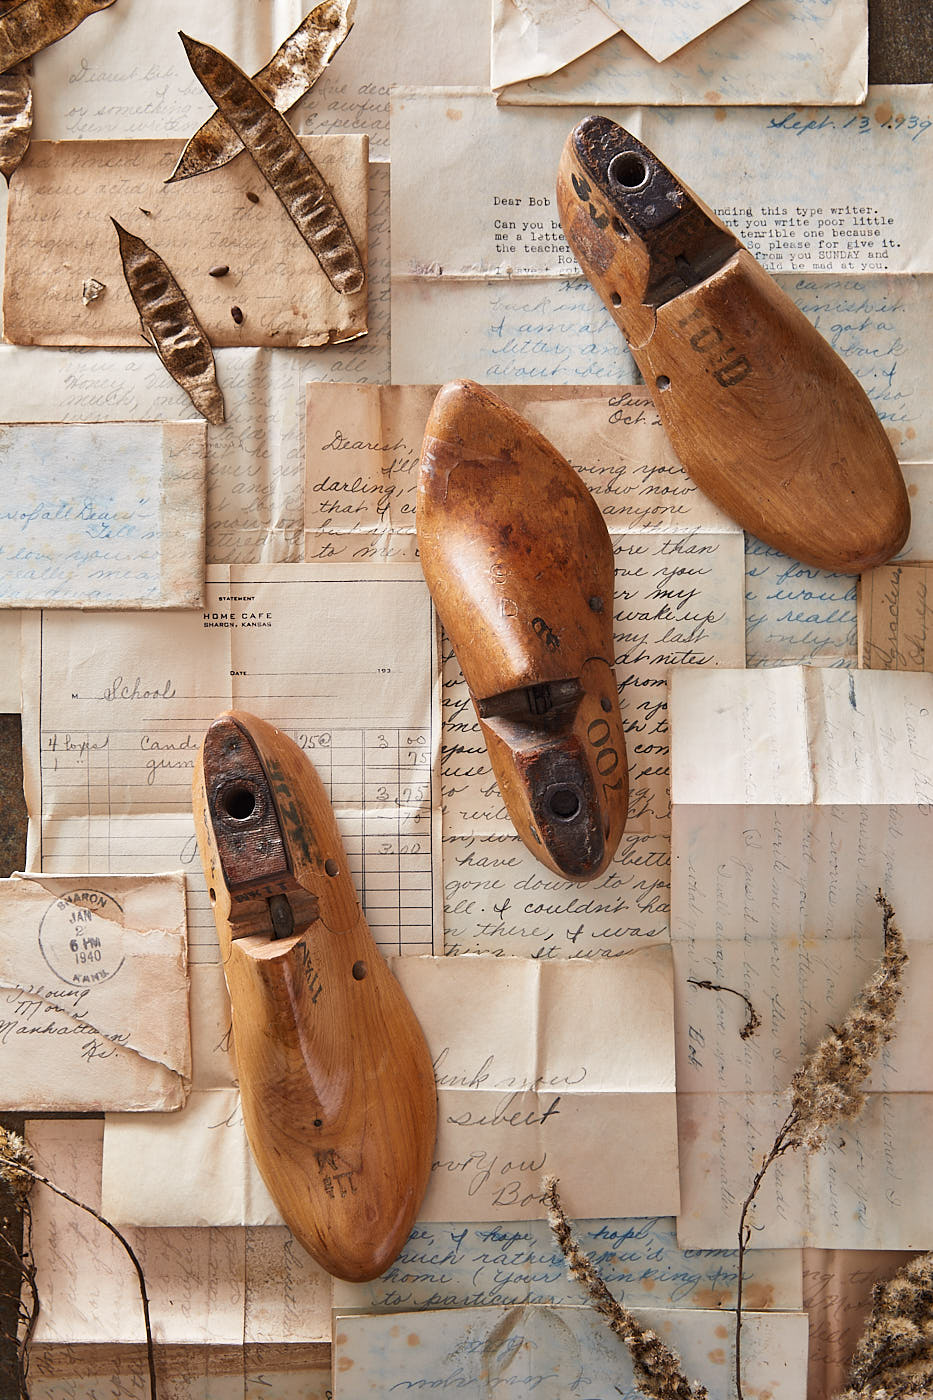 Vintage love letters and shoe forms